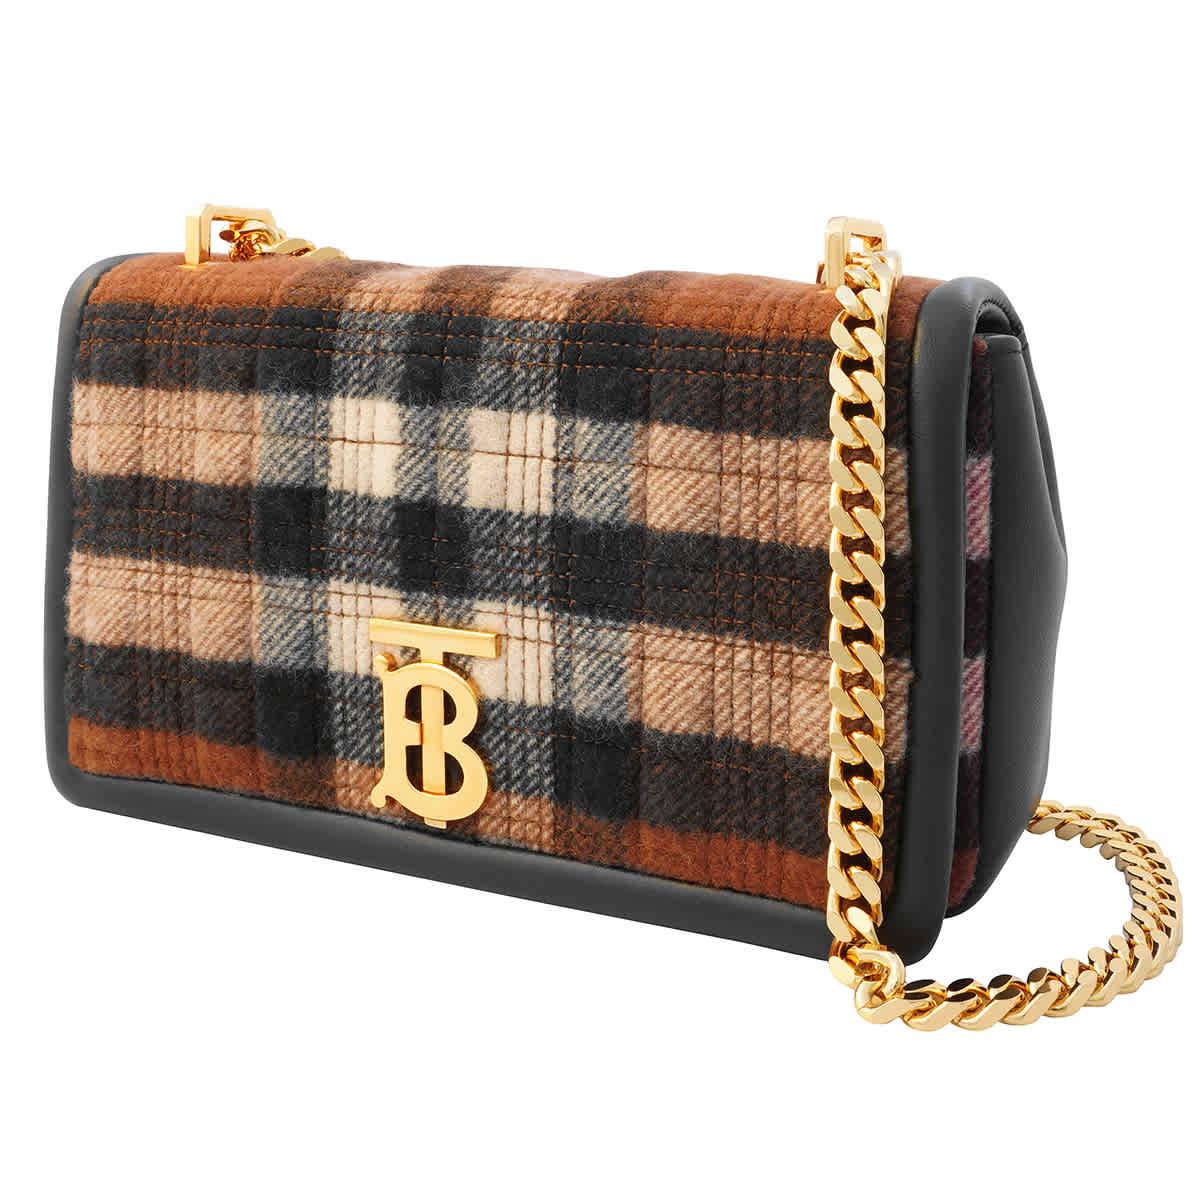 Burberry Small Lola Quilted Check Cashmere Bag in Black